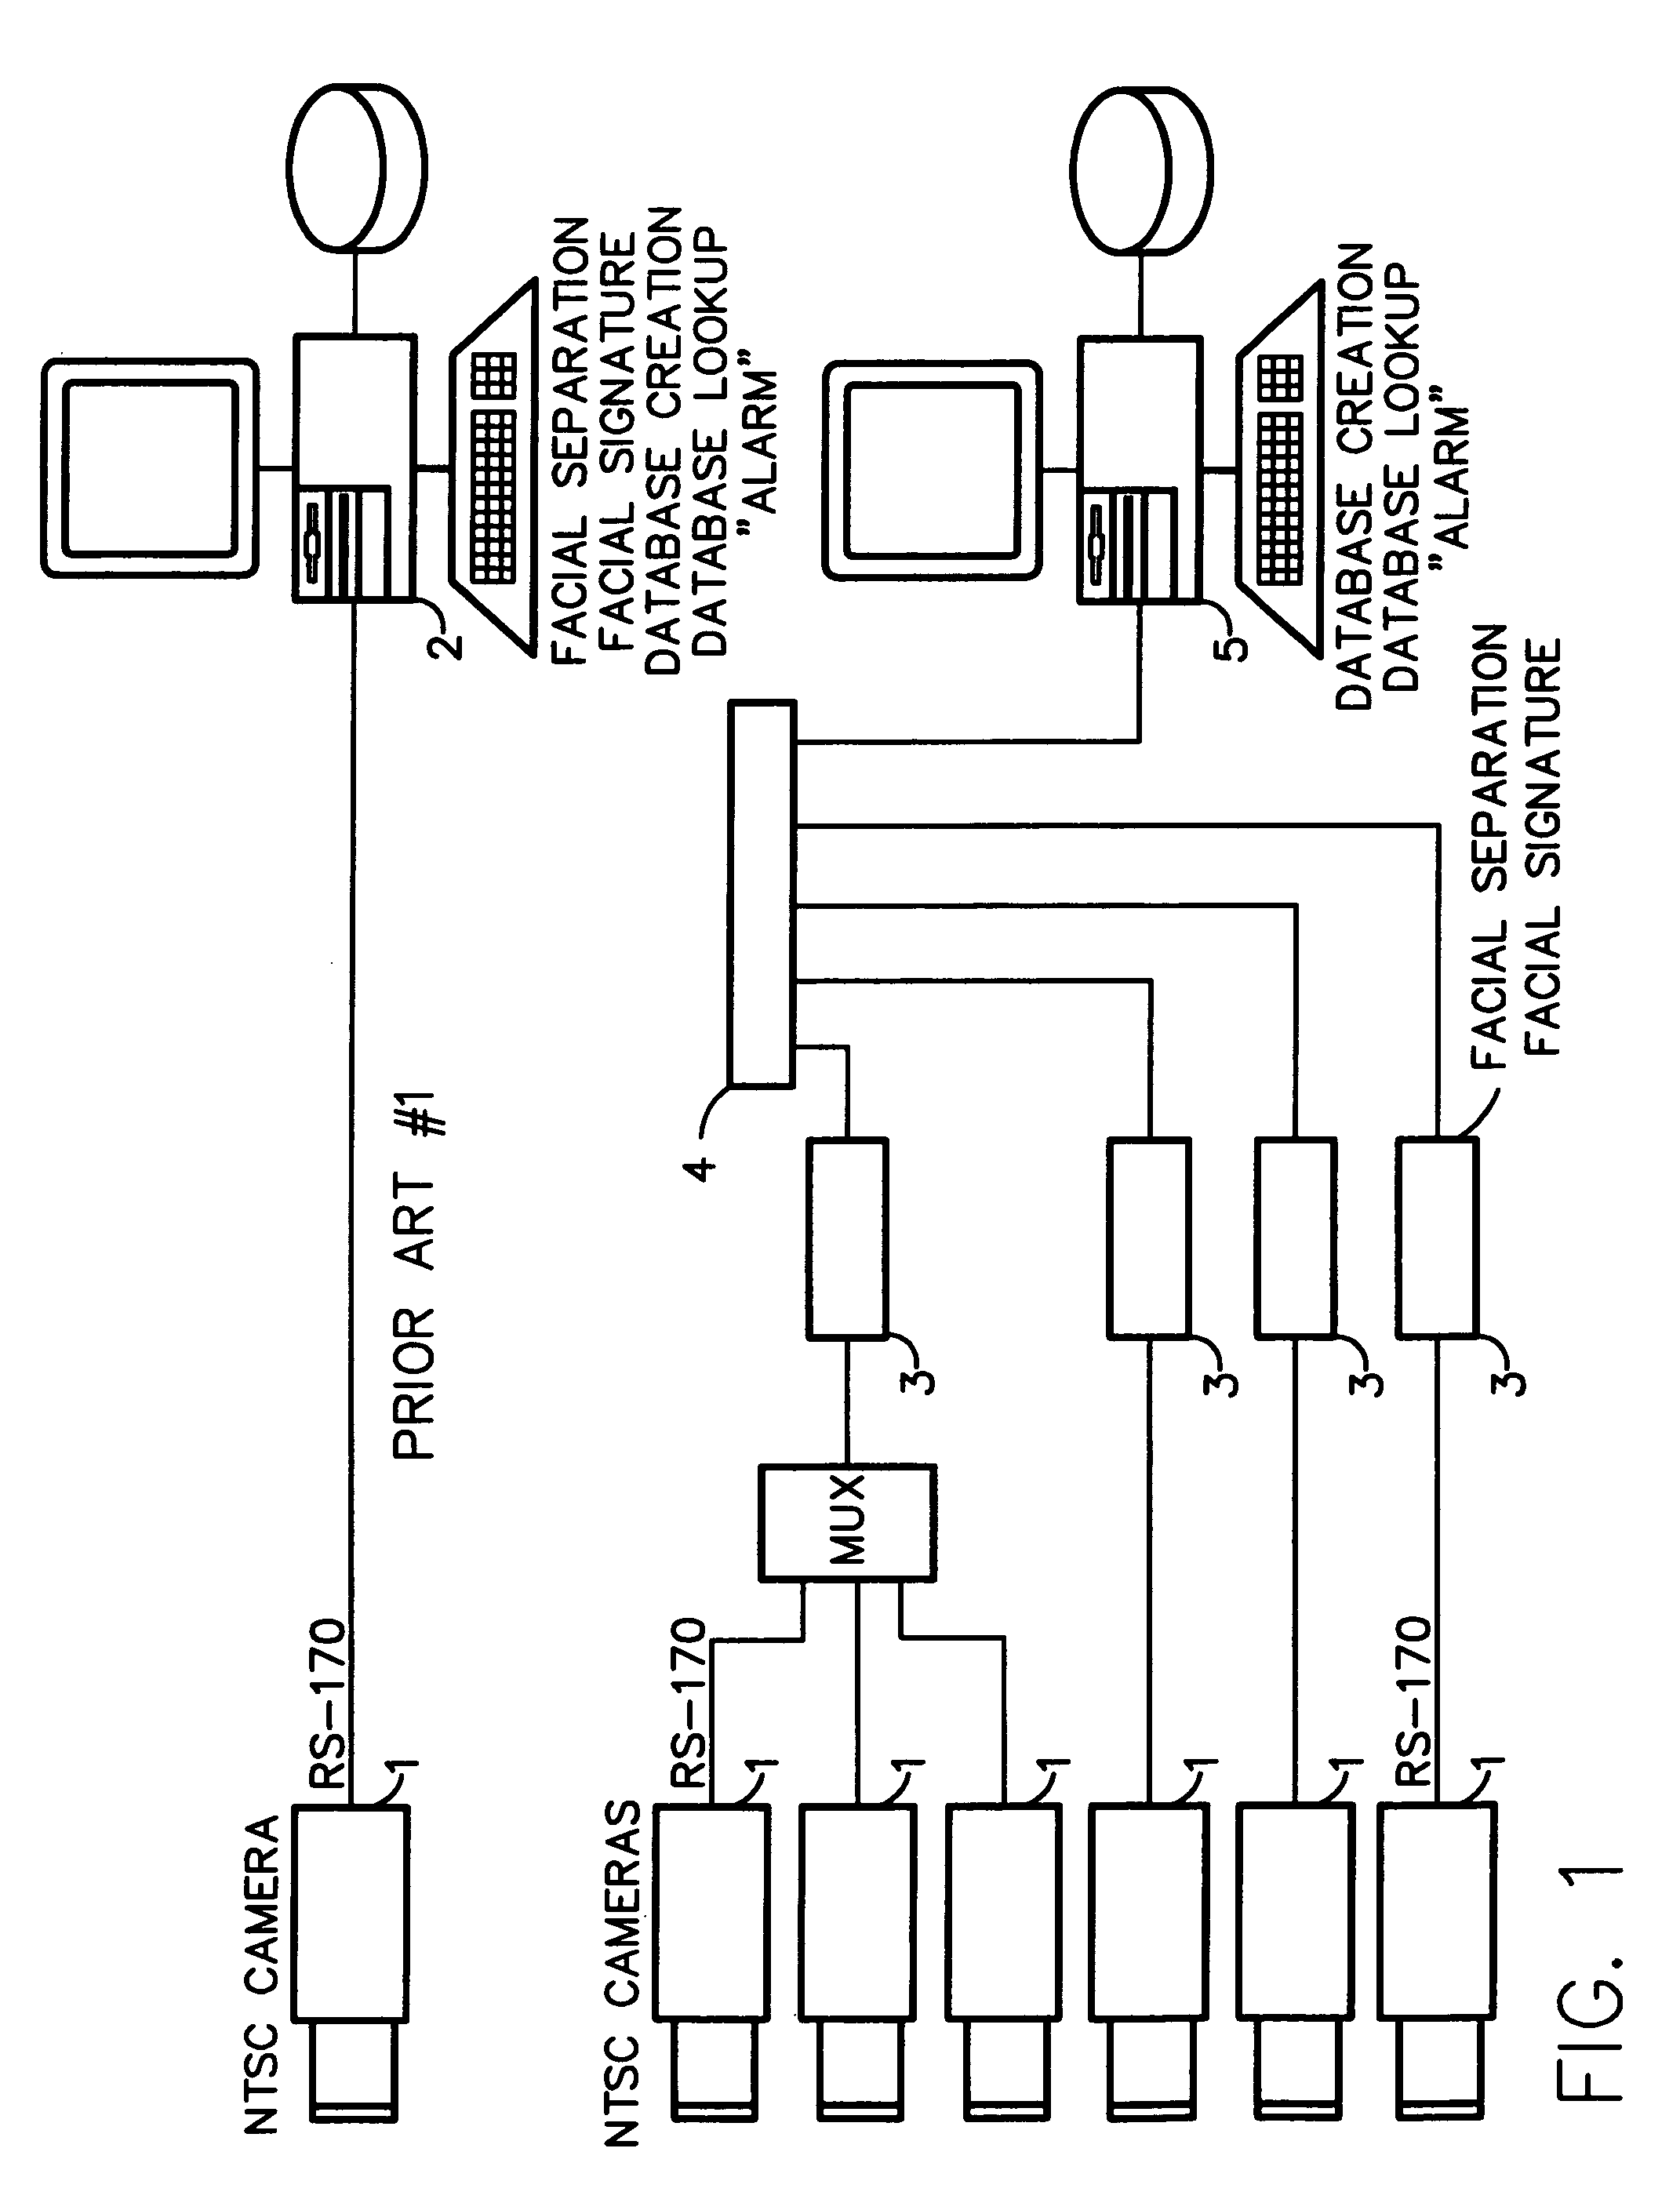 Method for incorporating facial recognition technology in a multimedia surveillance system